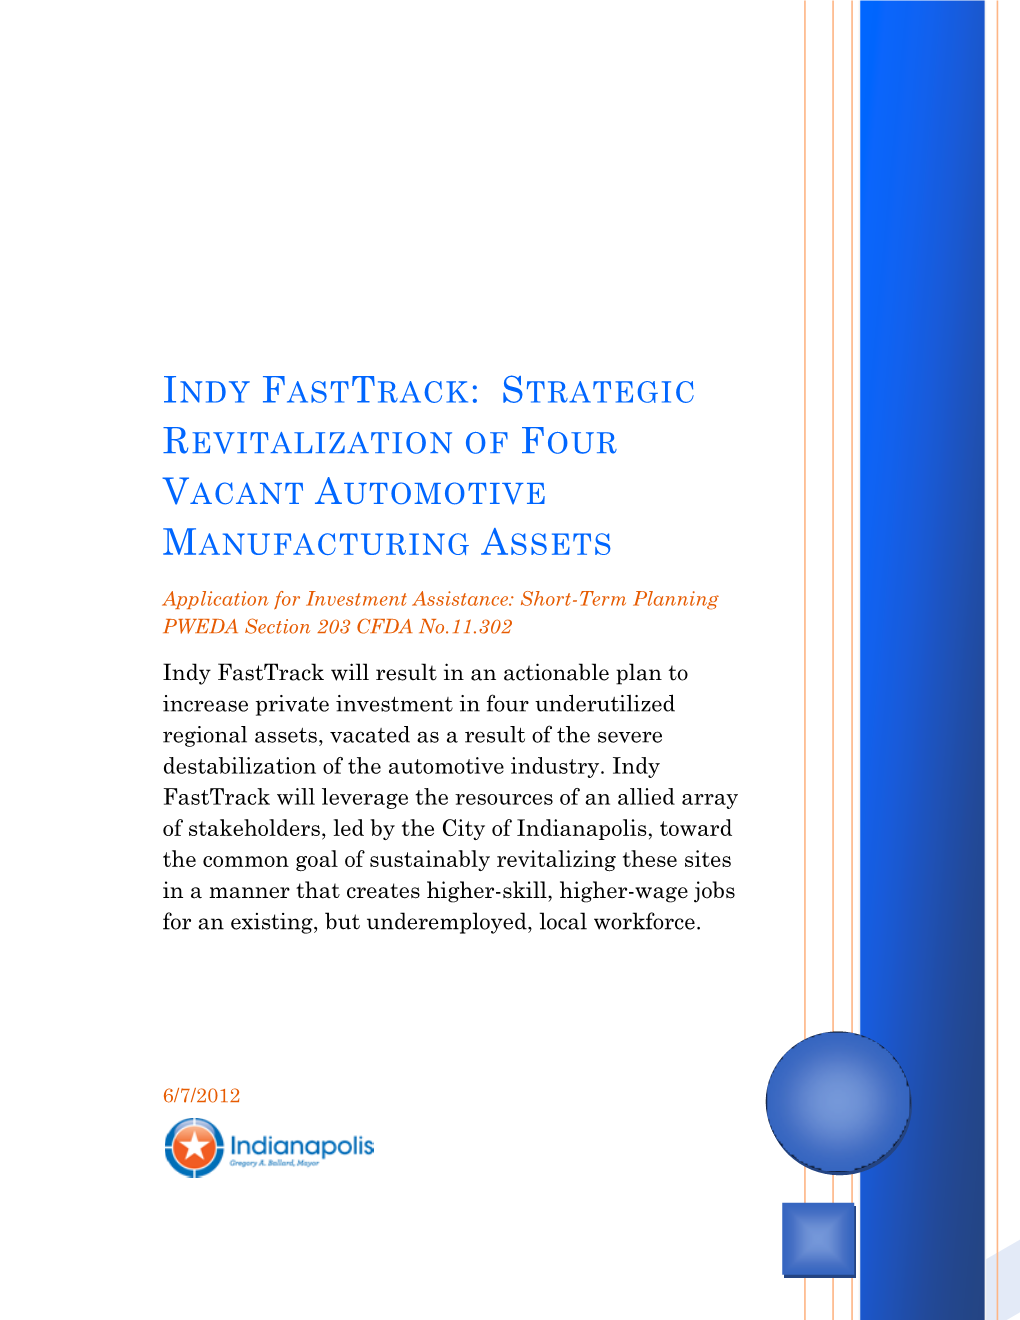 Indy Fasttrack: Strategic Revitalization of Four Vacant Automotive Manufacturing Assets